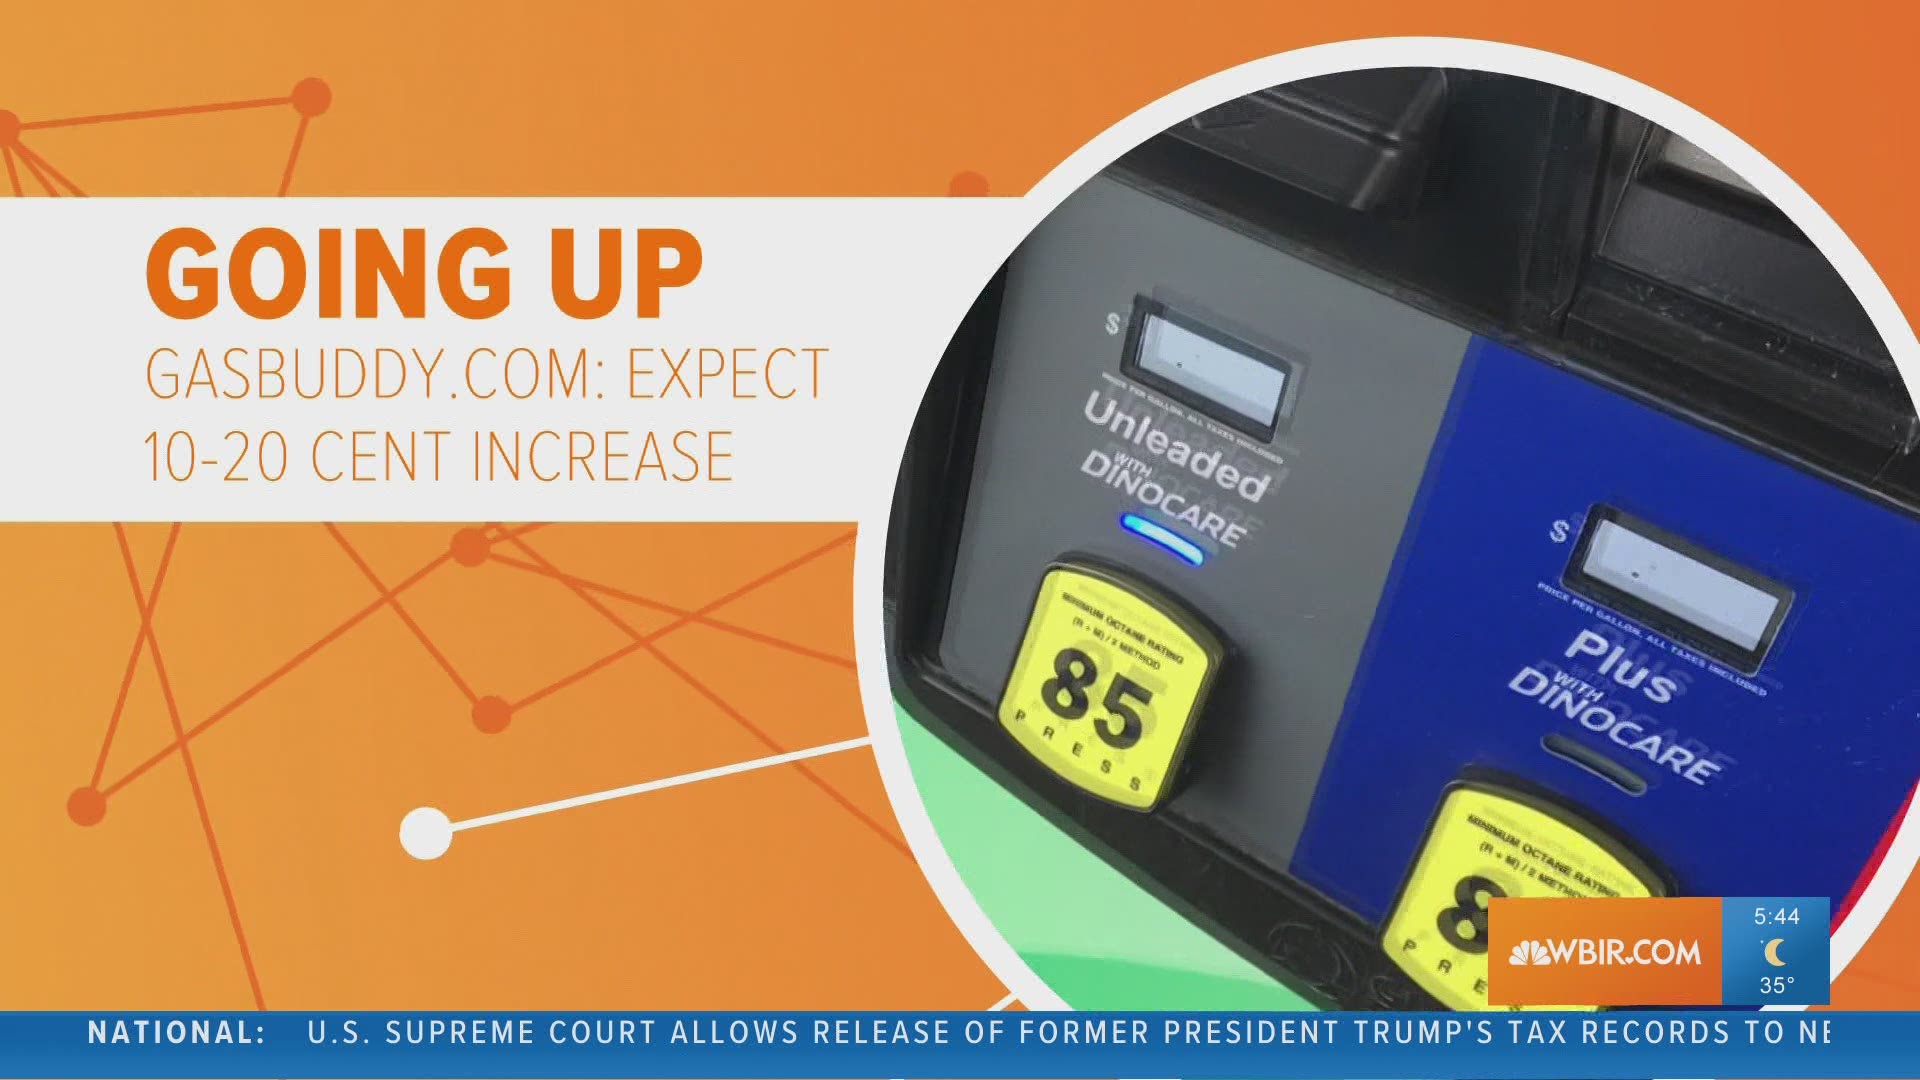 Over the next couple of weeks, the price you pay for a gallon of gas could go up 10 to 20 cents, according to experts at gasbuddy.com. Here's why.